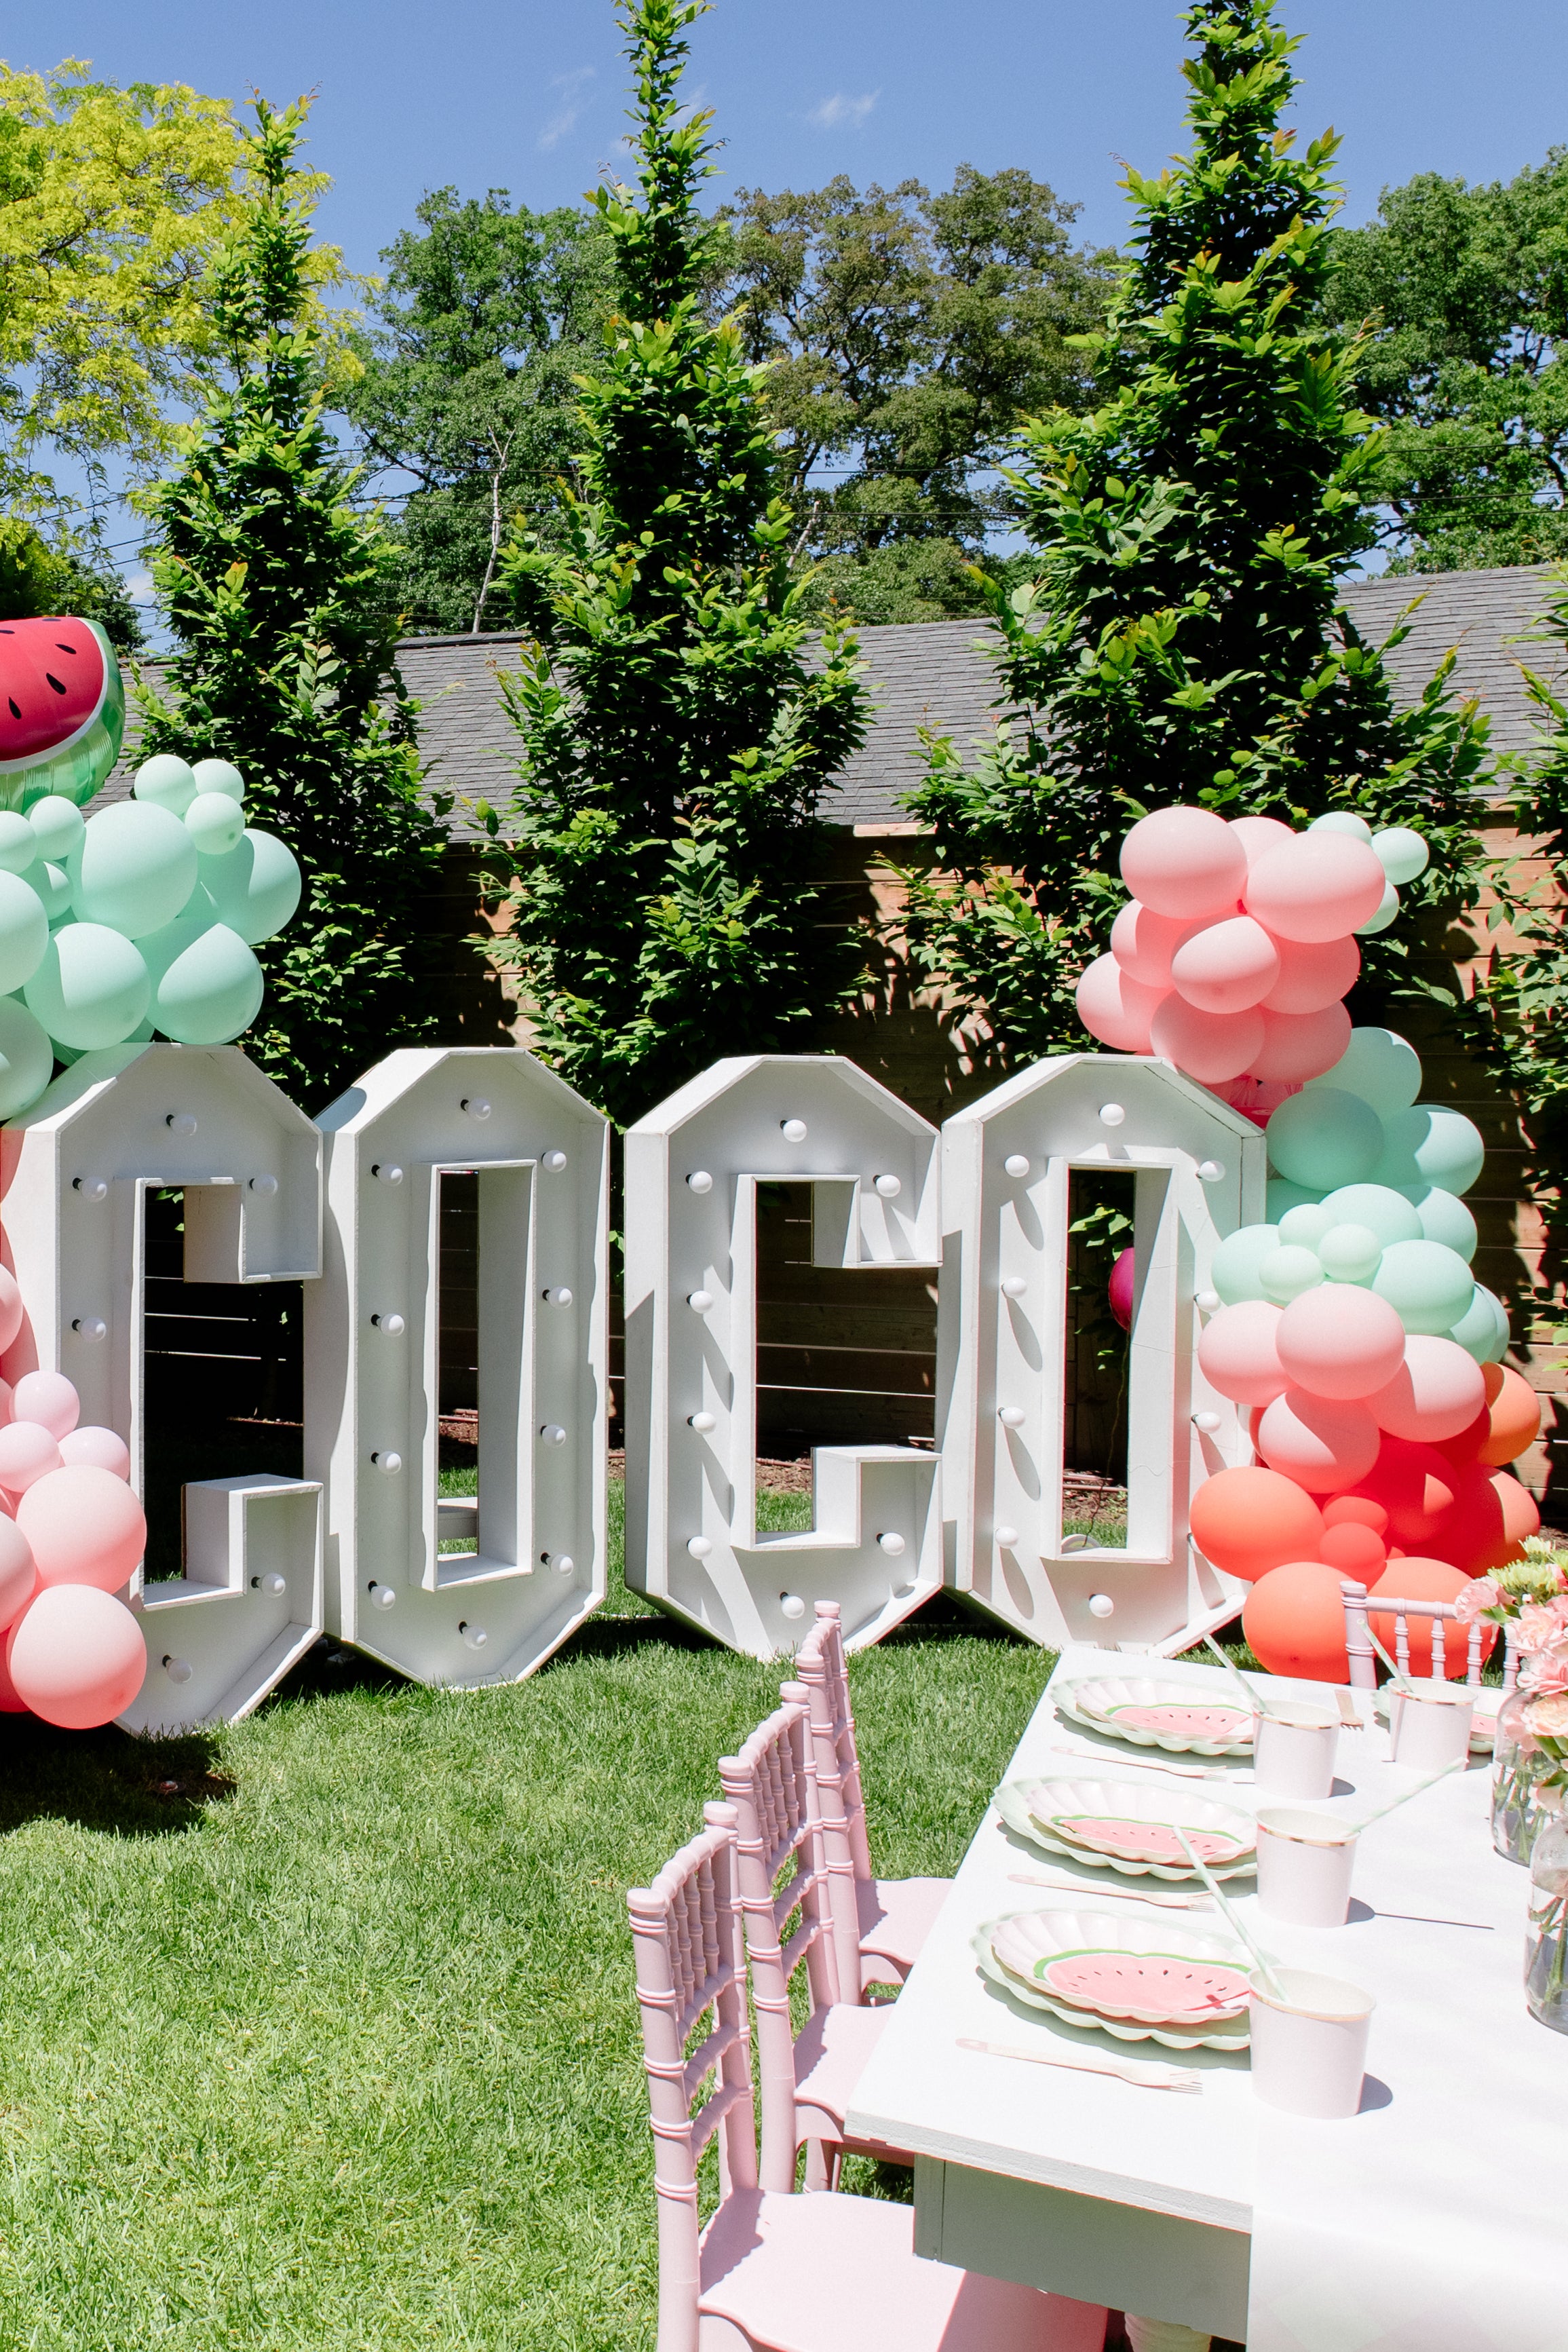 marquee letters that spell COCO